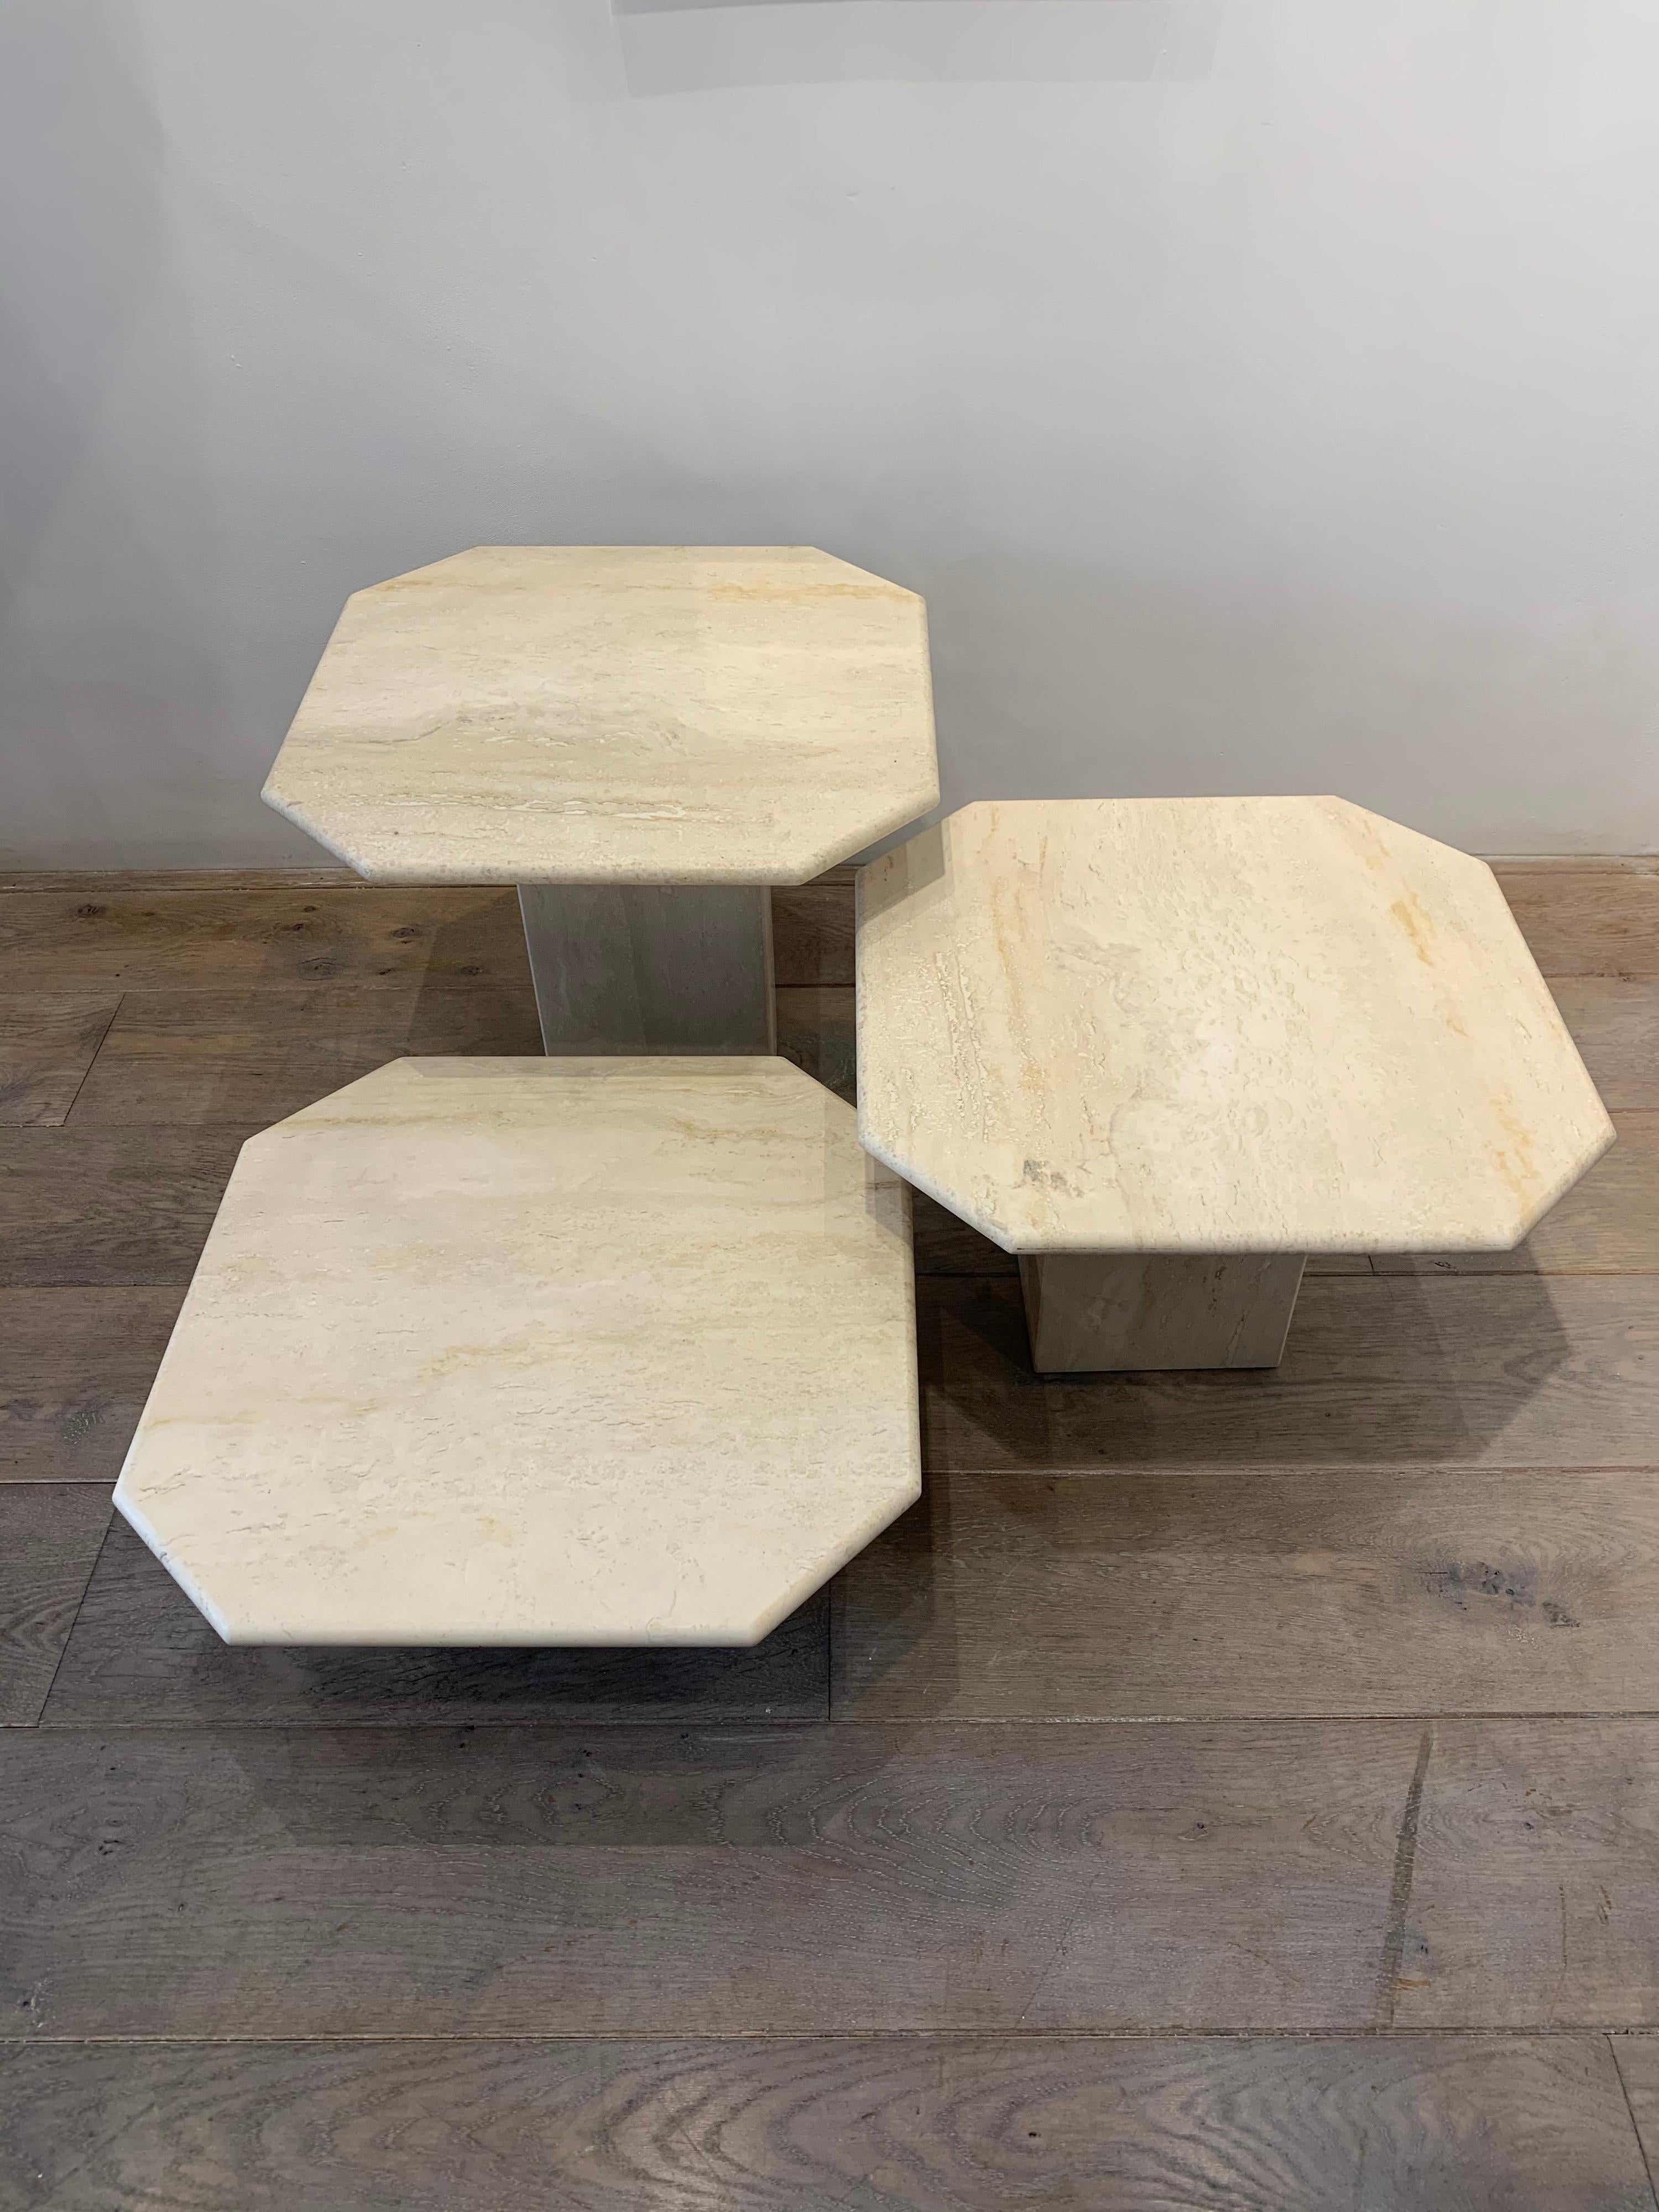 The tables have different sizes in height. 

The bigger one is 42cm height. 
Middle one 32cm height. 
Small one 22cm height.